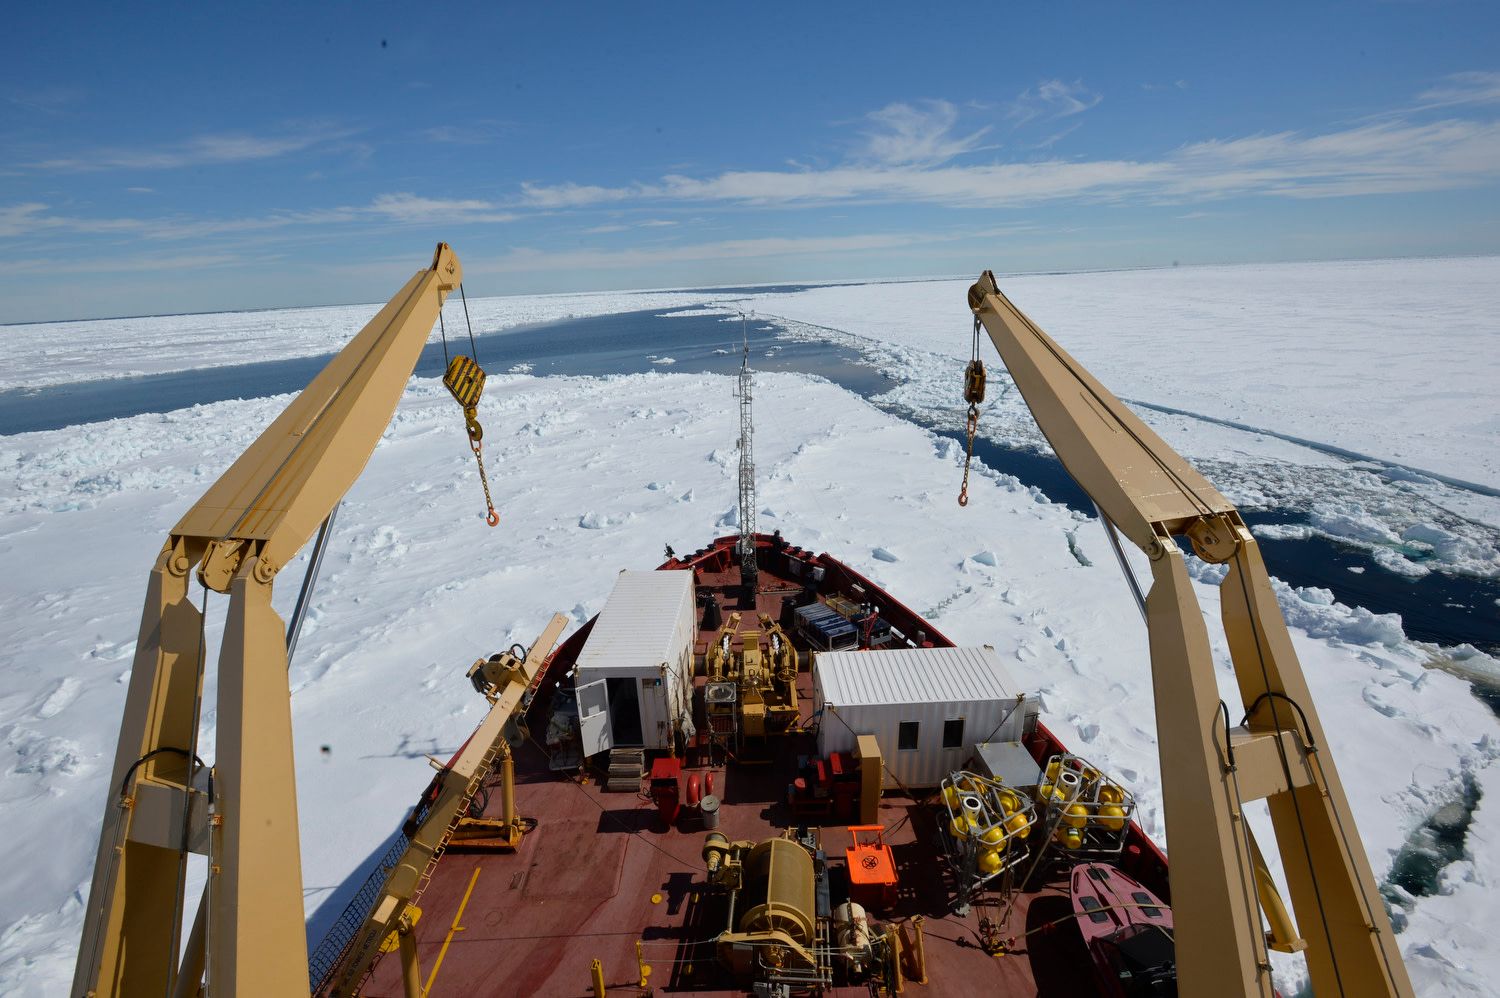 Hudson Bay, Canada, June 2018. The Amundsen, Canadian ice breaking Arctic research vessel, moves through thick sea ice. Apart of its coast guard duties, the ship tours the Canadian Arctic every year with an international group of ice specialists, biologists, oceanographers working in its on-board 22 laboratories.